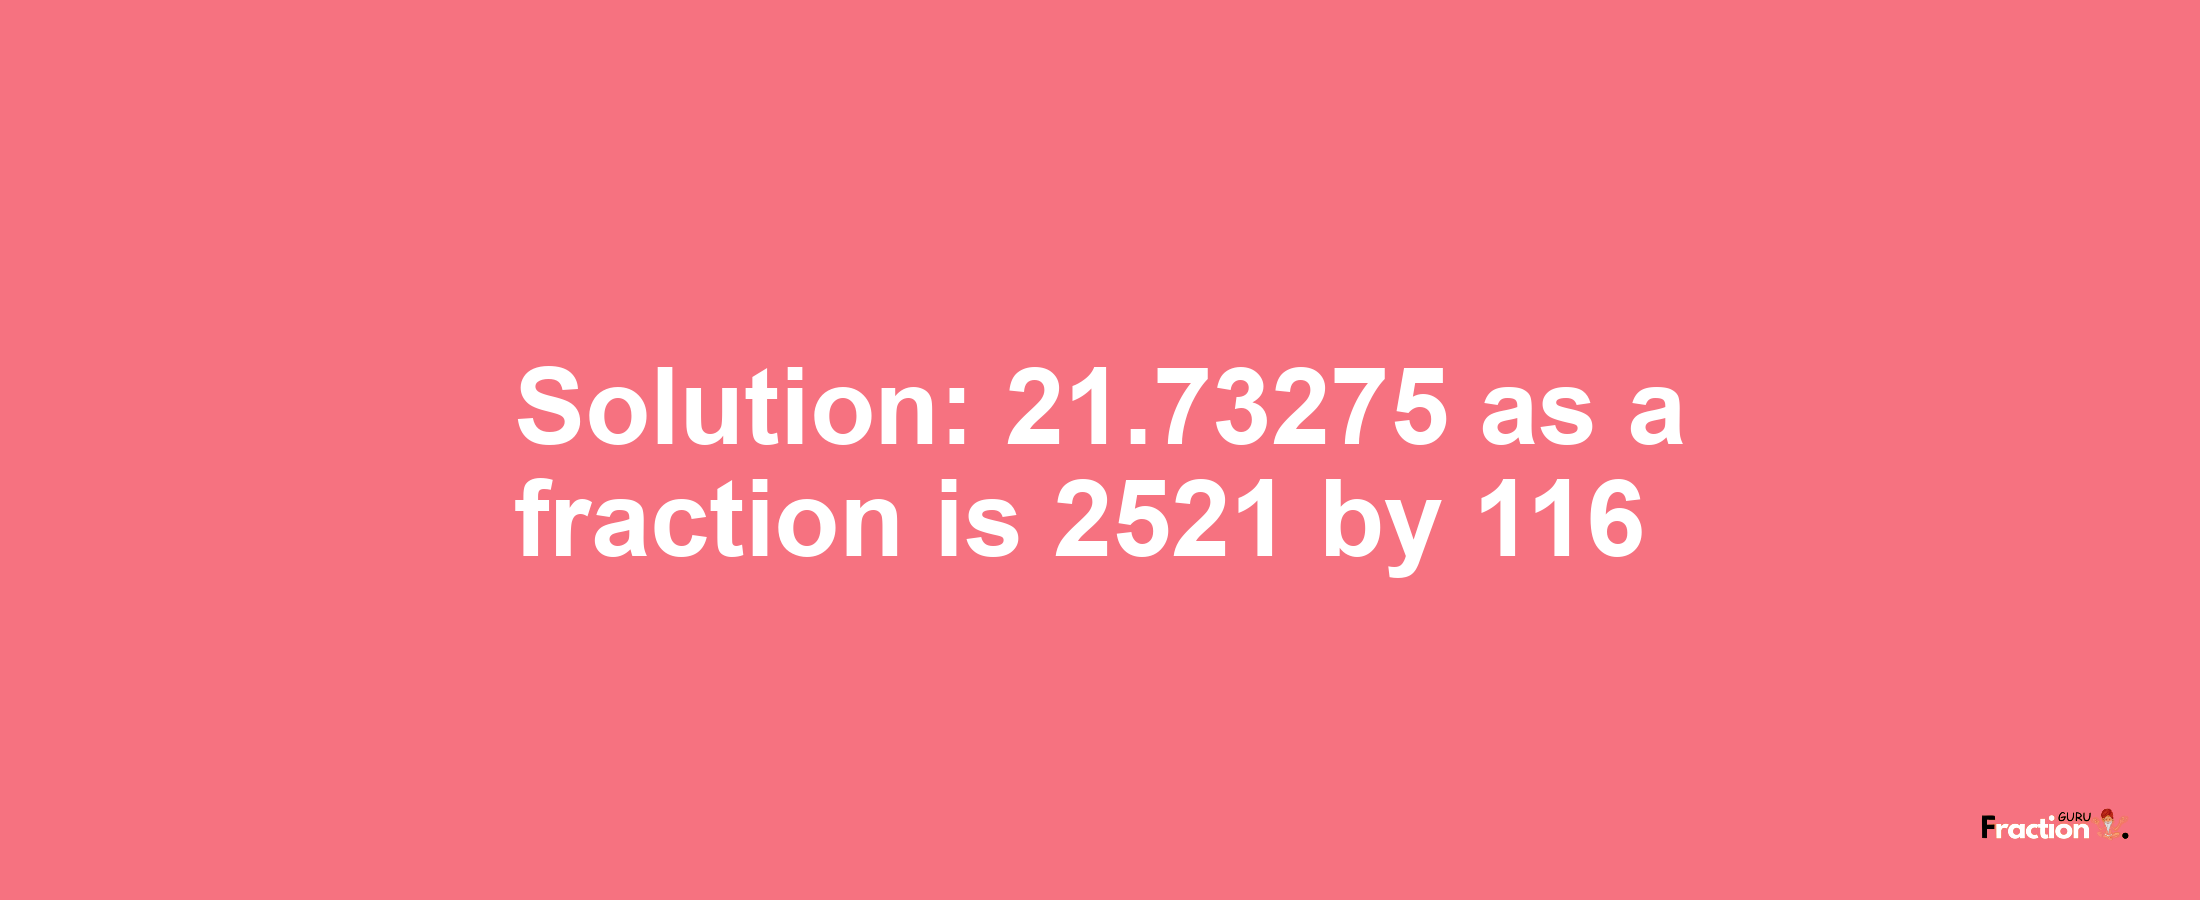 Solution:21.73275 as a fraction is 2521/116